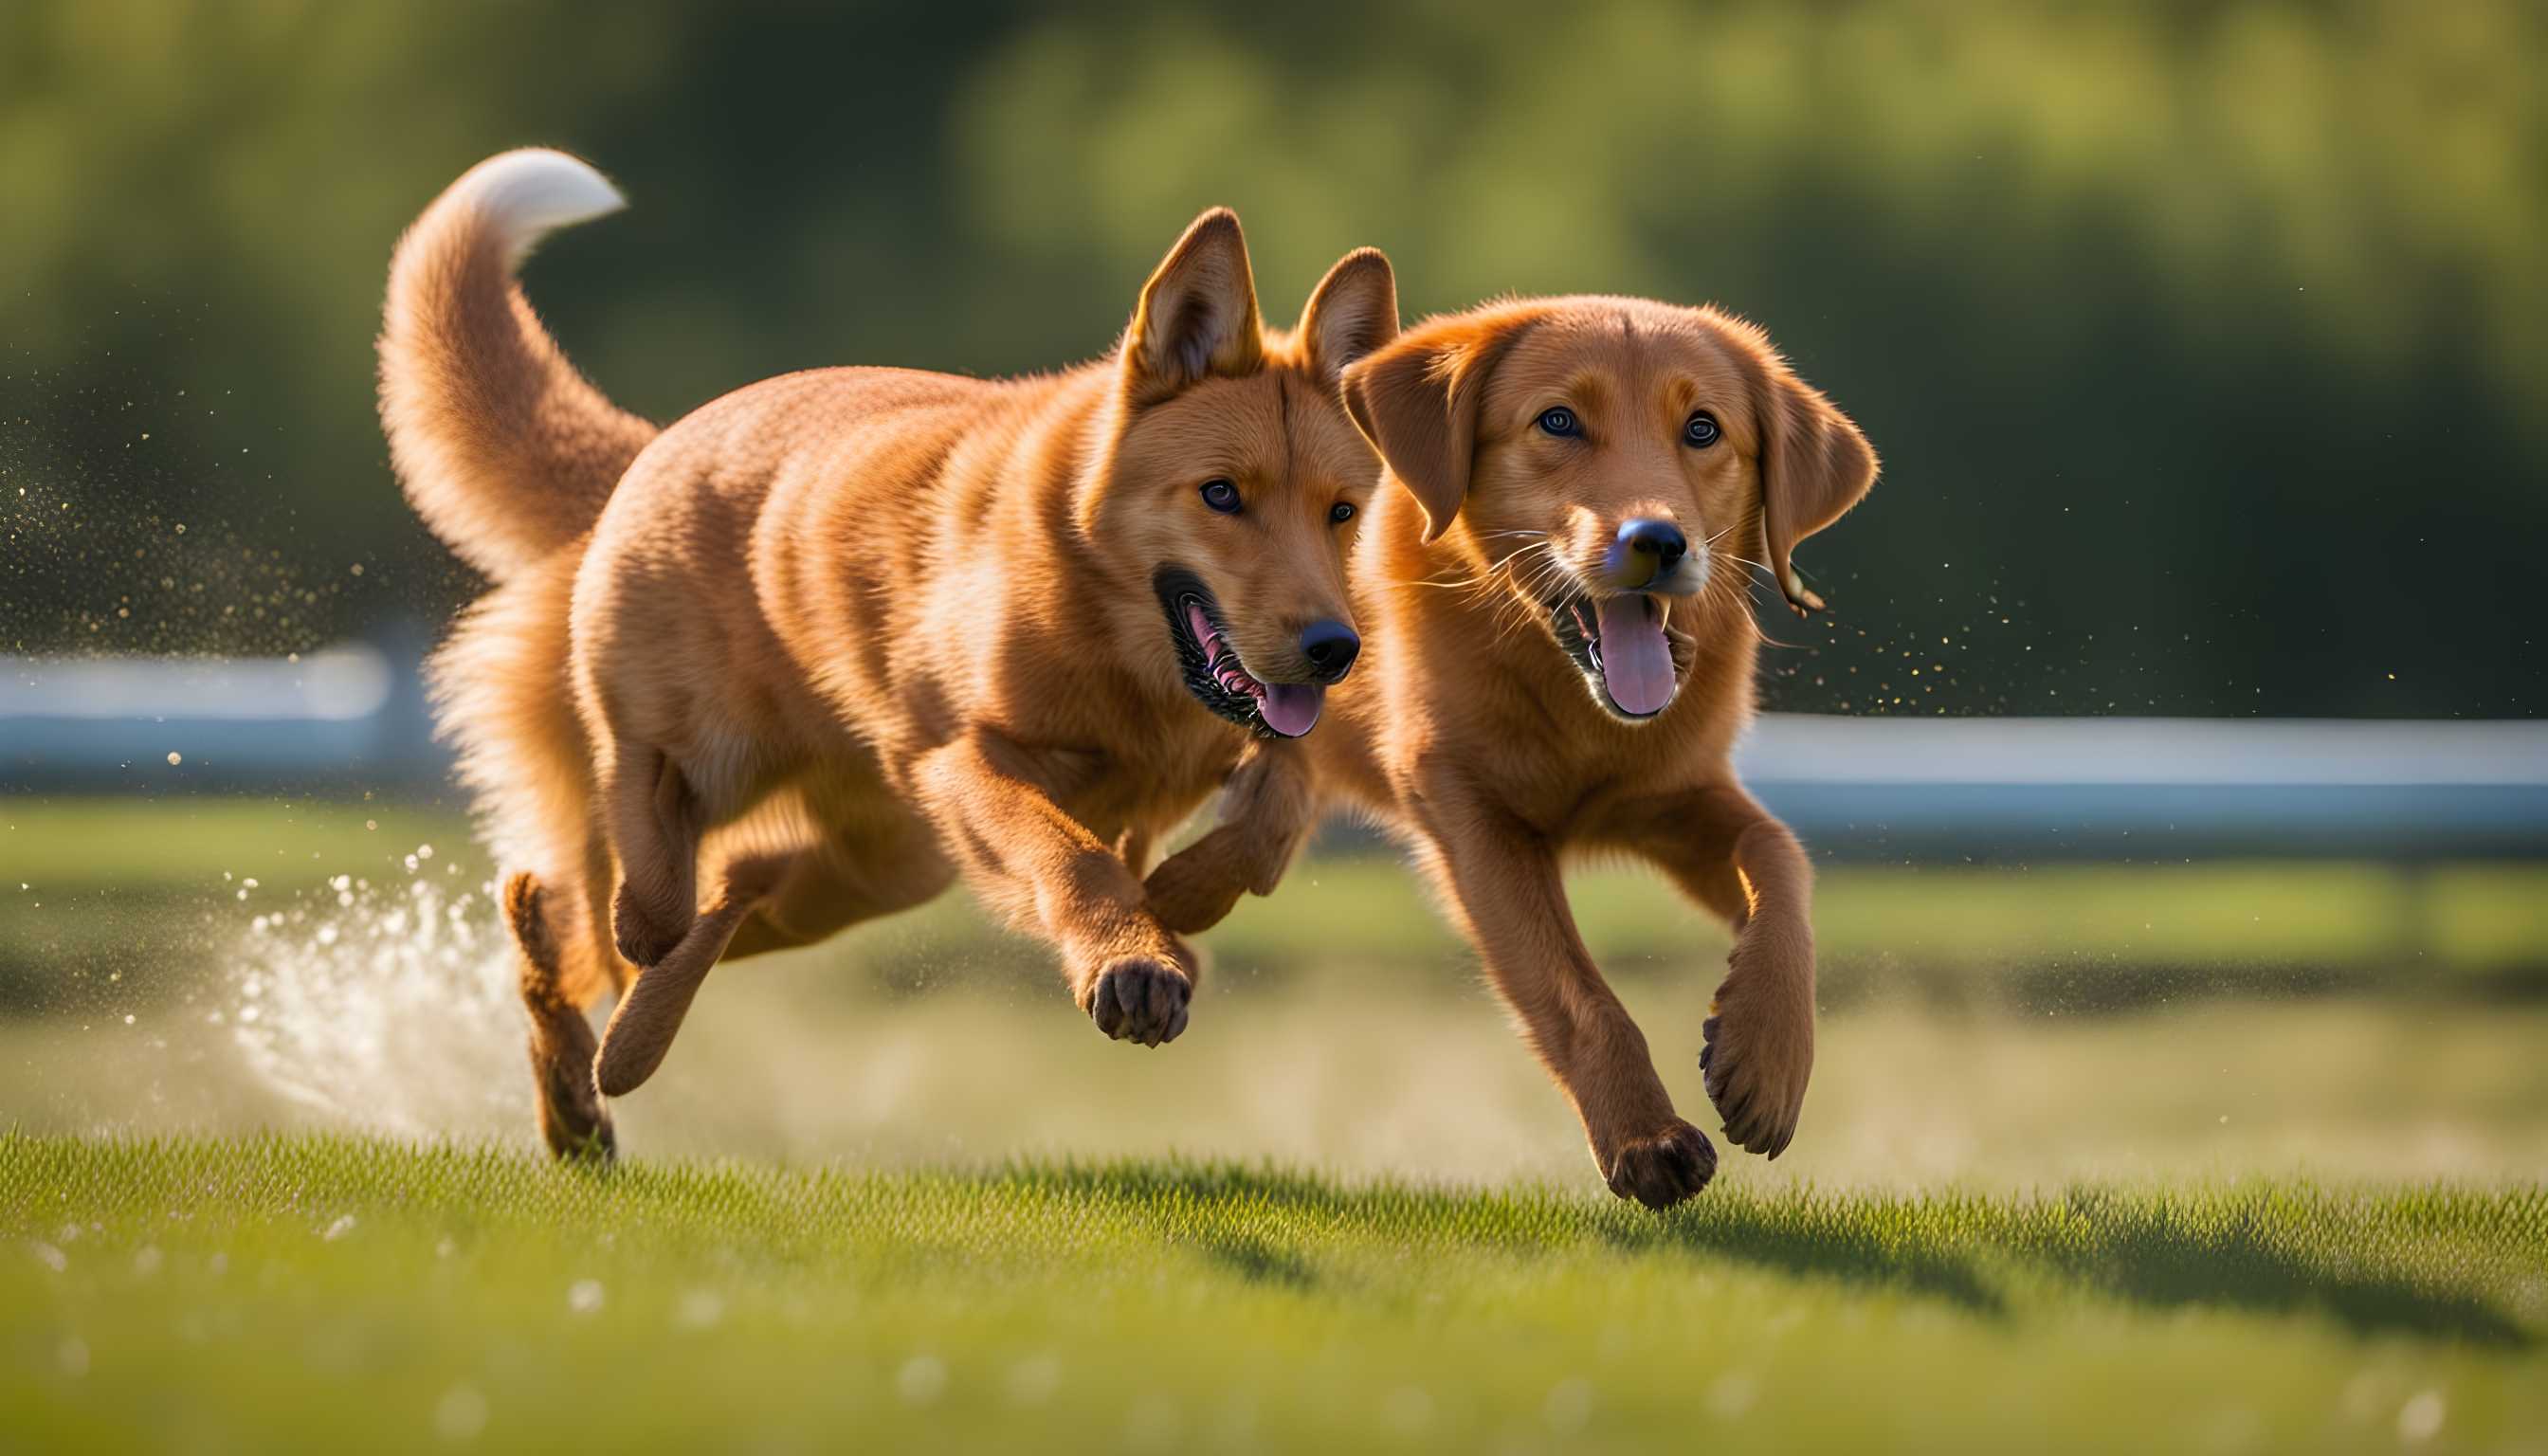 A playful Red Fox Labrador Retriever in action, epitomizing the breed's renowned energetic and friendly nature.